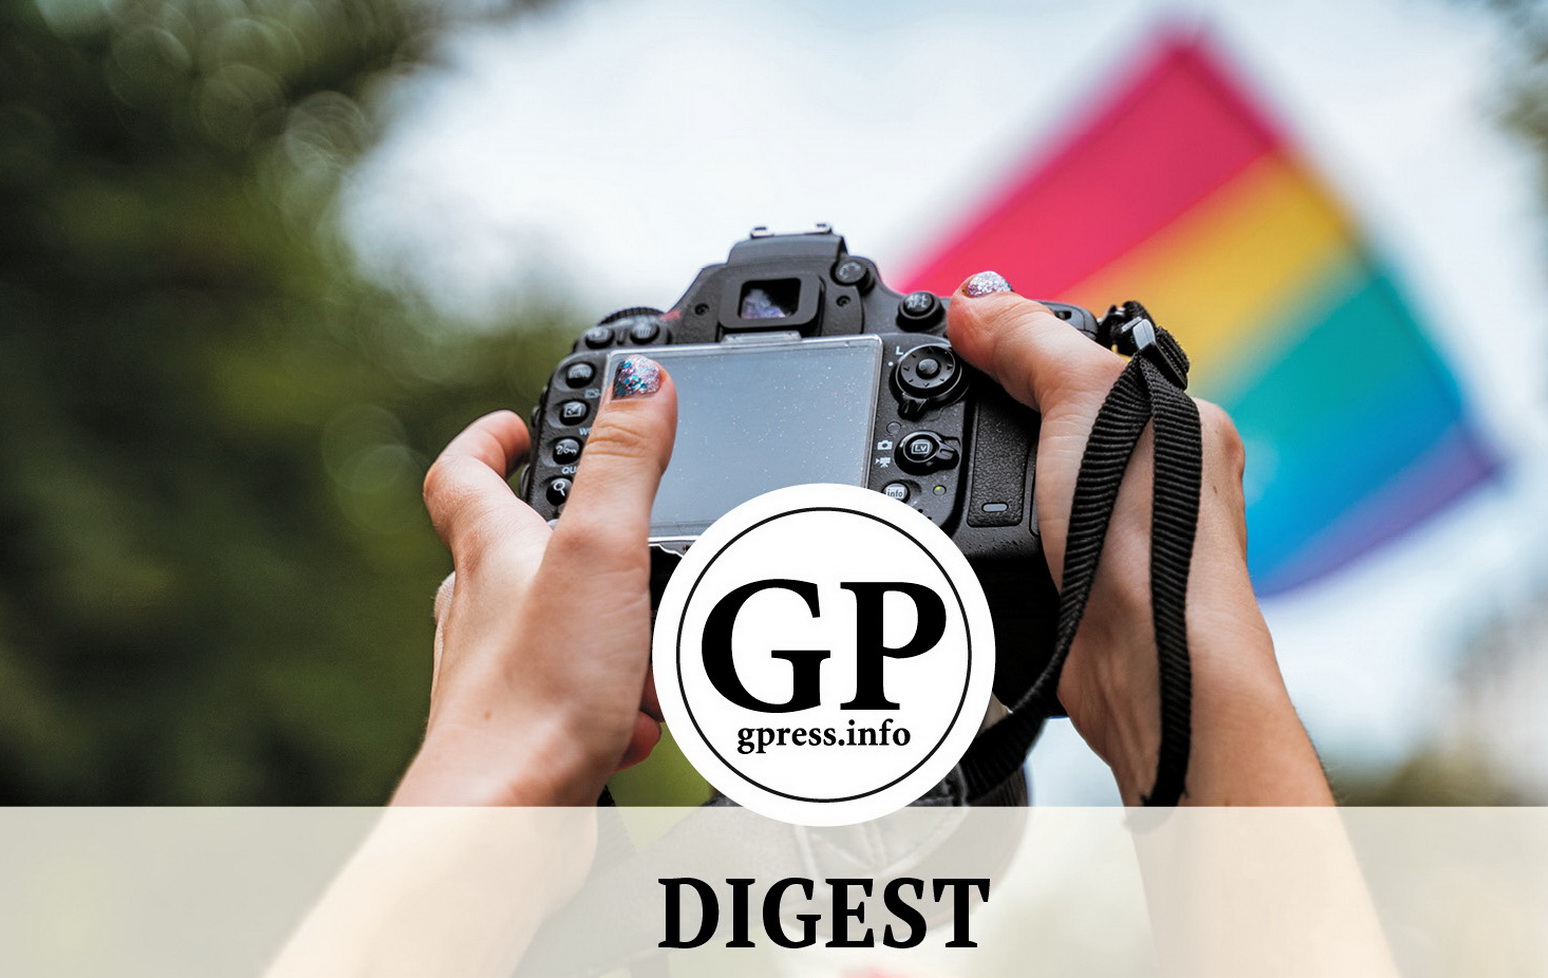 DIGEST COVERAGE OF LGBTQ+ TOPICS IN BELARUSIAN MEDIA July–September 2022